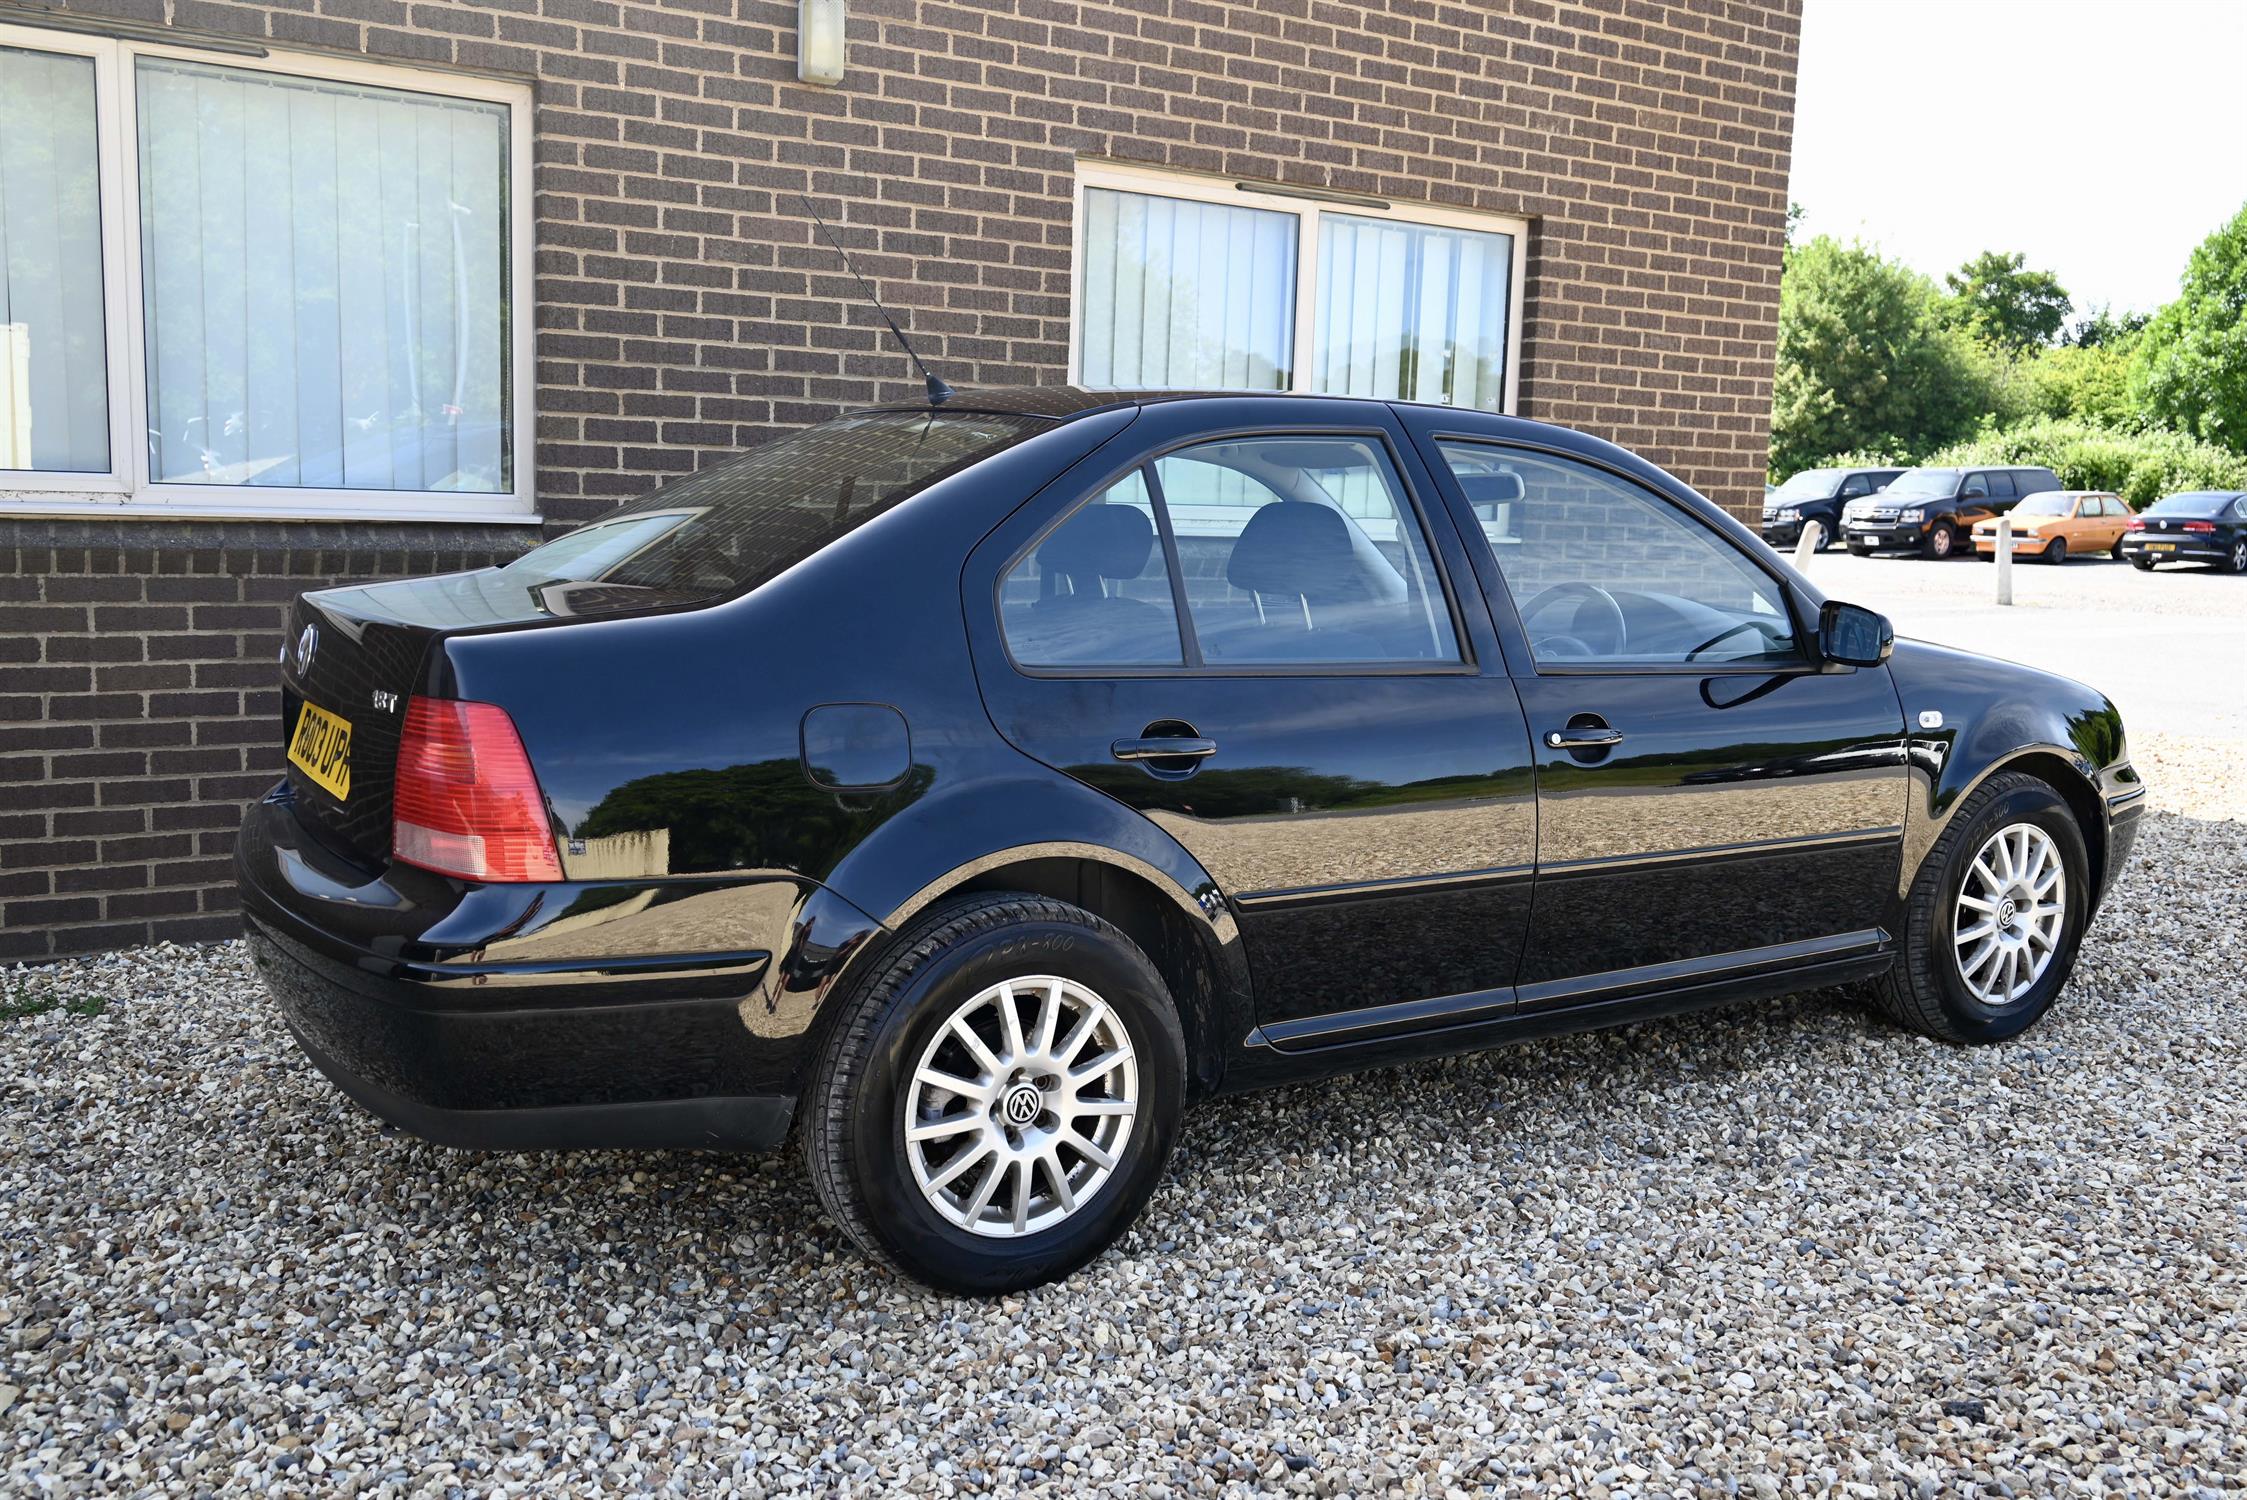 2003 (Mk 4) VW Bora ST 1.8T Black coachwork with charcoal cloth upholstery. 5-speed manual, - Image 3 of 16